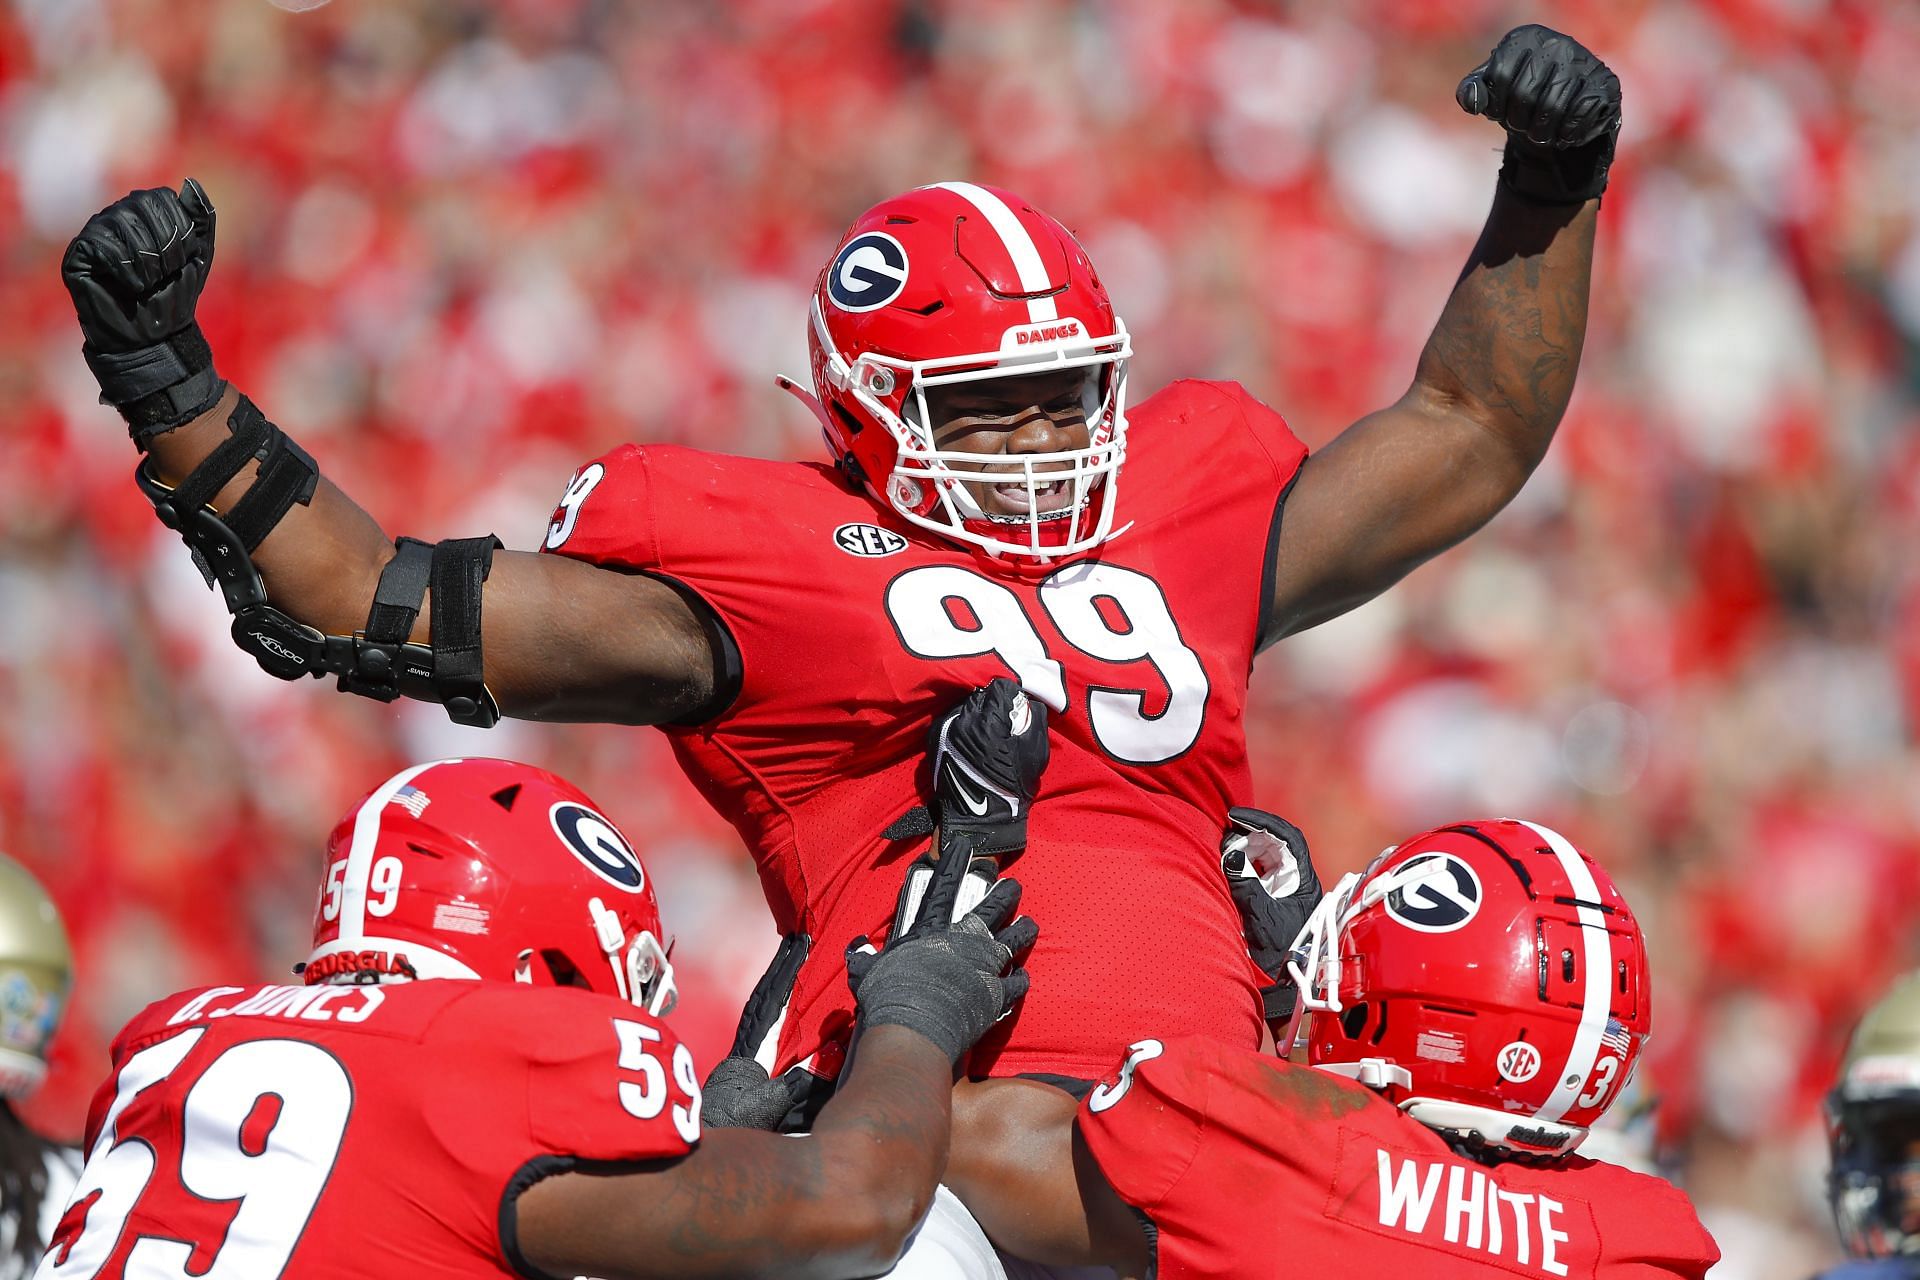 Jordan Davis #99 of the Georgia Bulldogs reacts after rushing in for a touchdown during the first half against the Charleston Southern Buccaneers at Sanford Stadium on November 20, 2021 in Athens, Georgia.